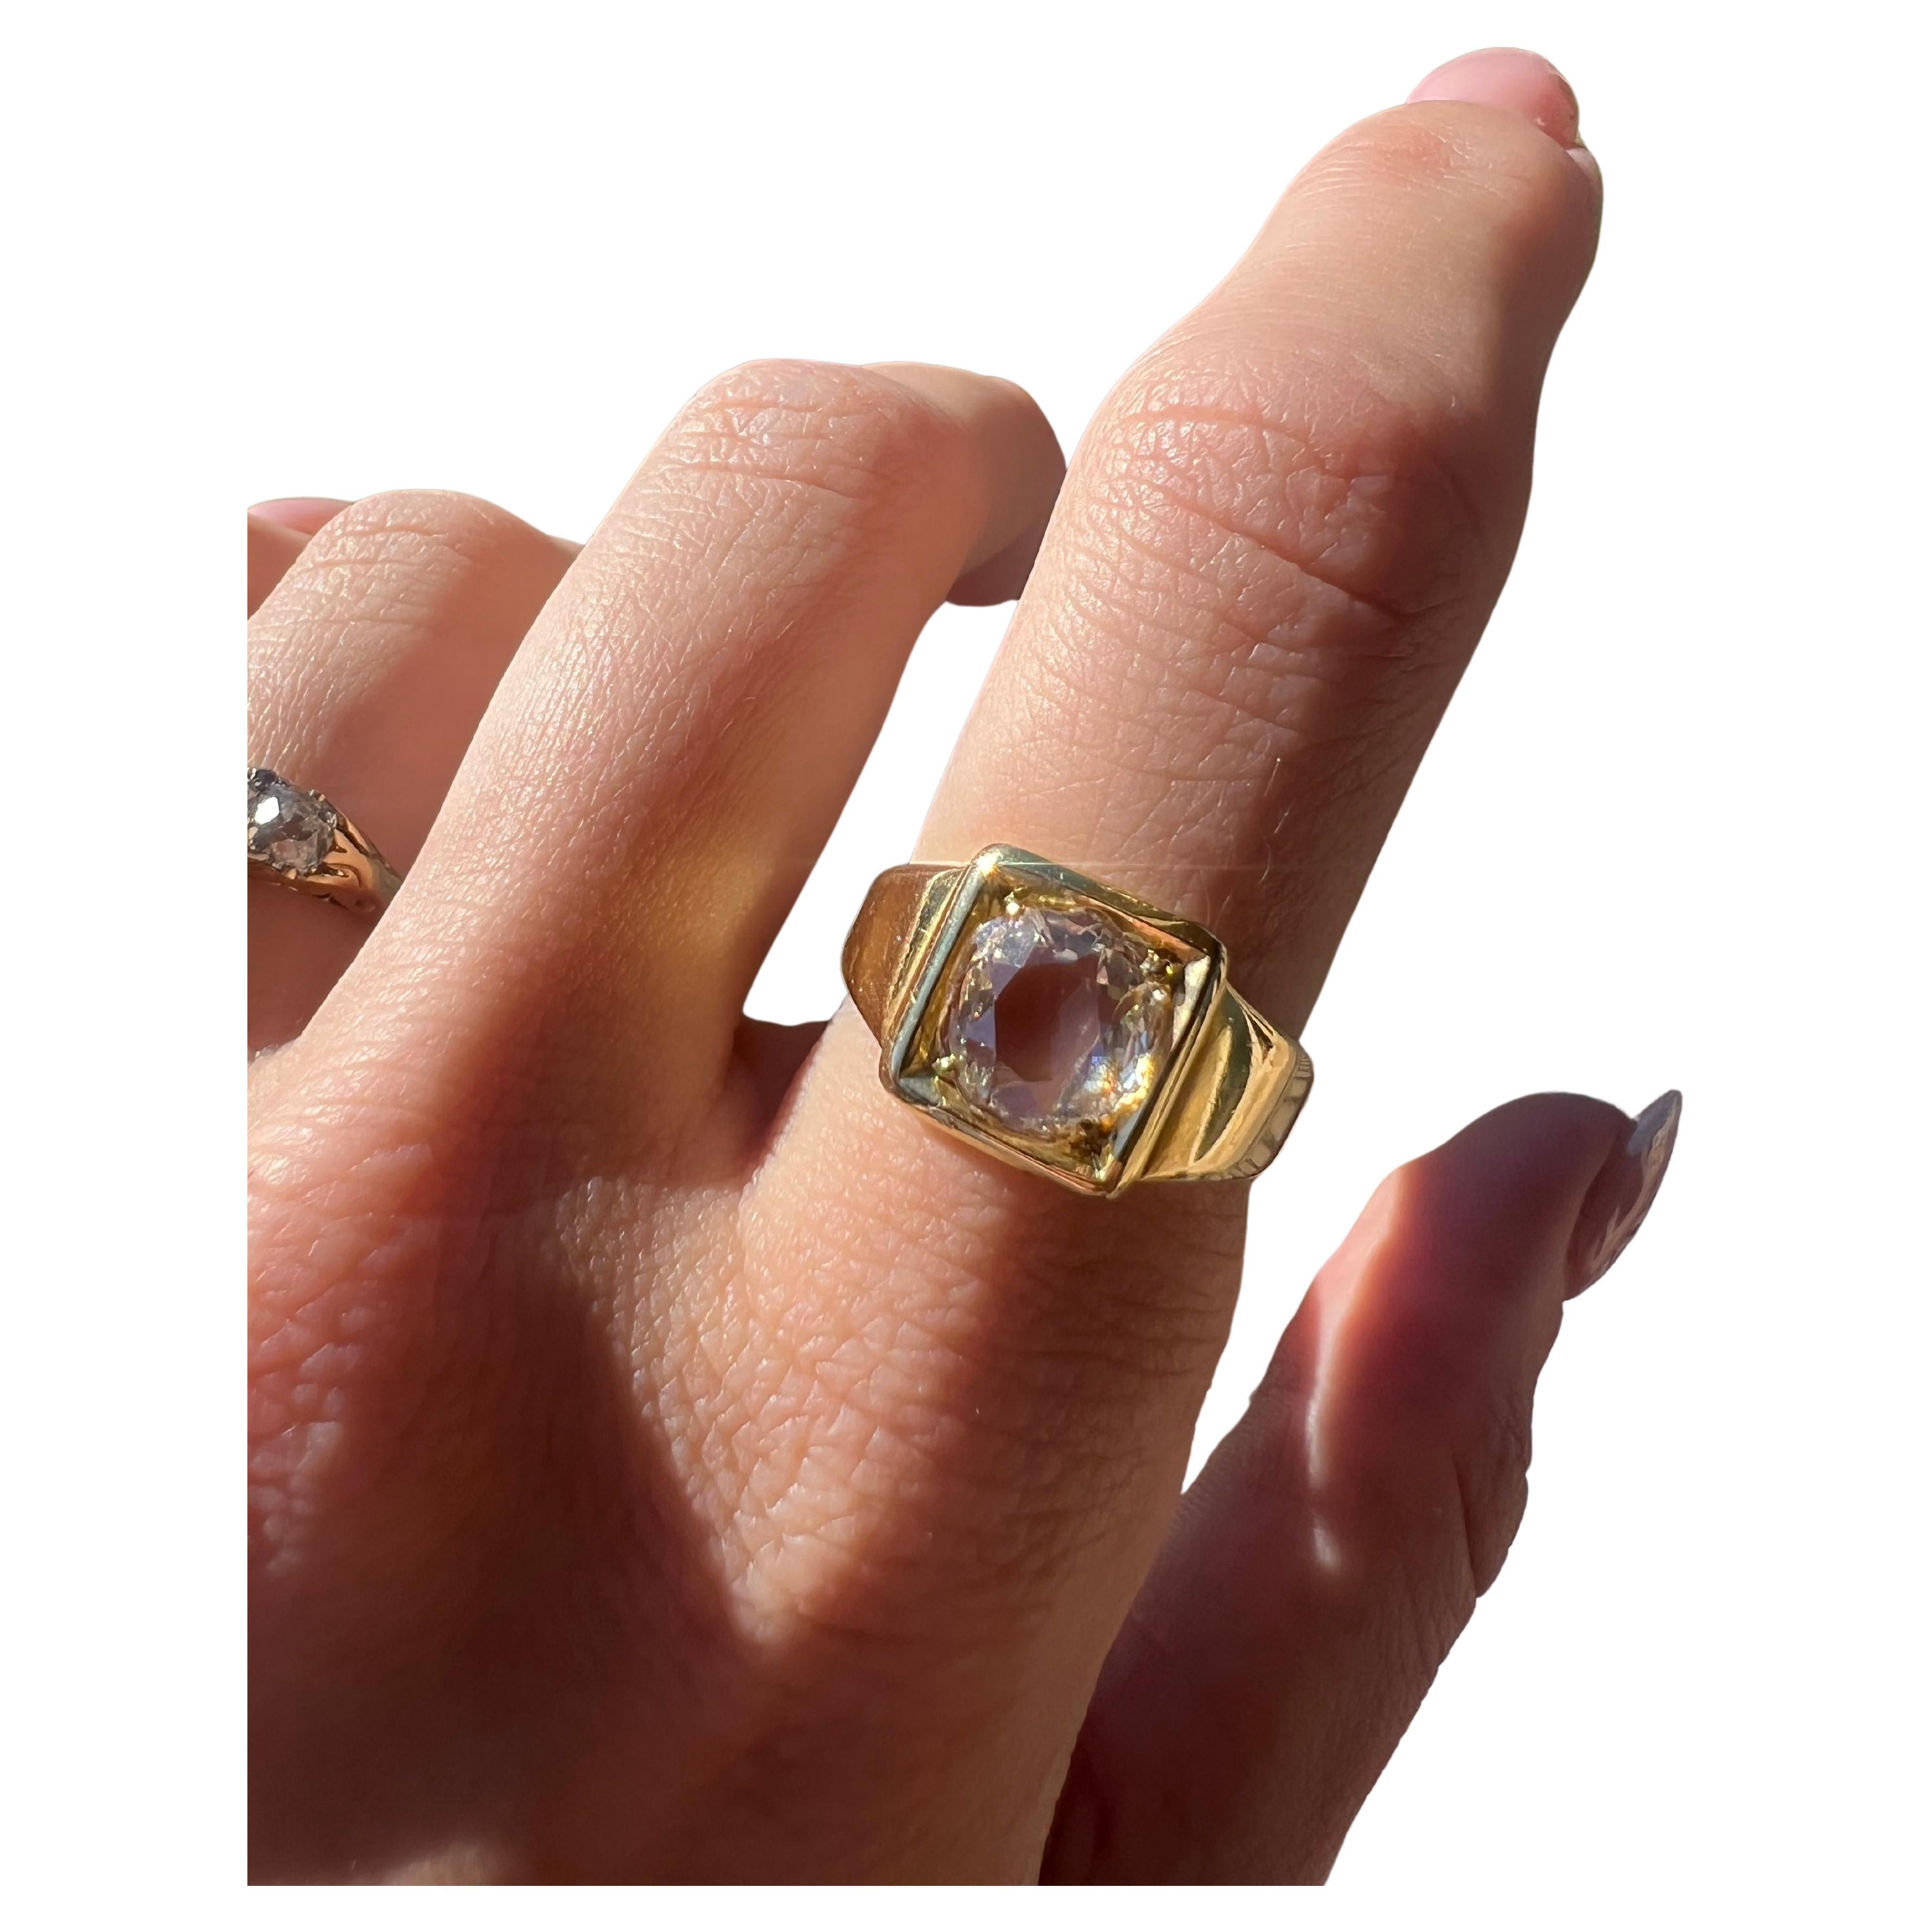 This lovely Victorian 18k yellow gold old mine cut ring is incredibly unique. This beautiful ring features a spready old mine cut diamond set in a thick gold band, hallmarked Birmingham 1872.  The diamond spreads 8.9mm x 7.7mm, and is estimated to